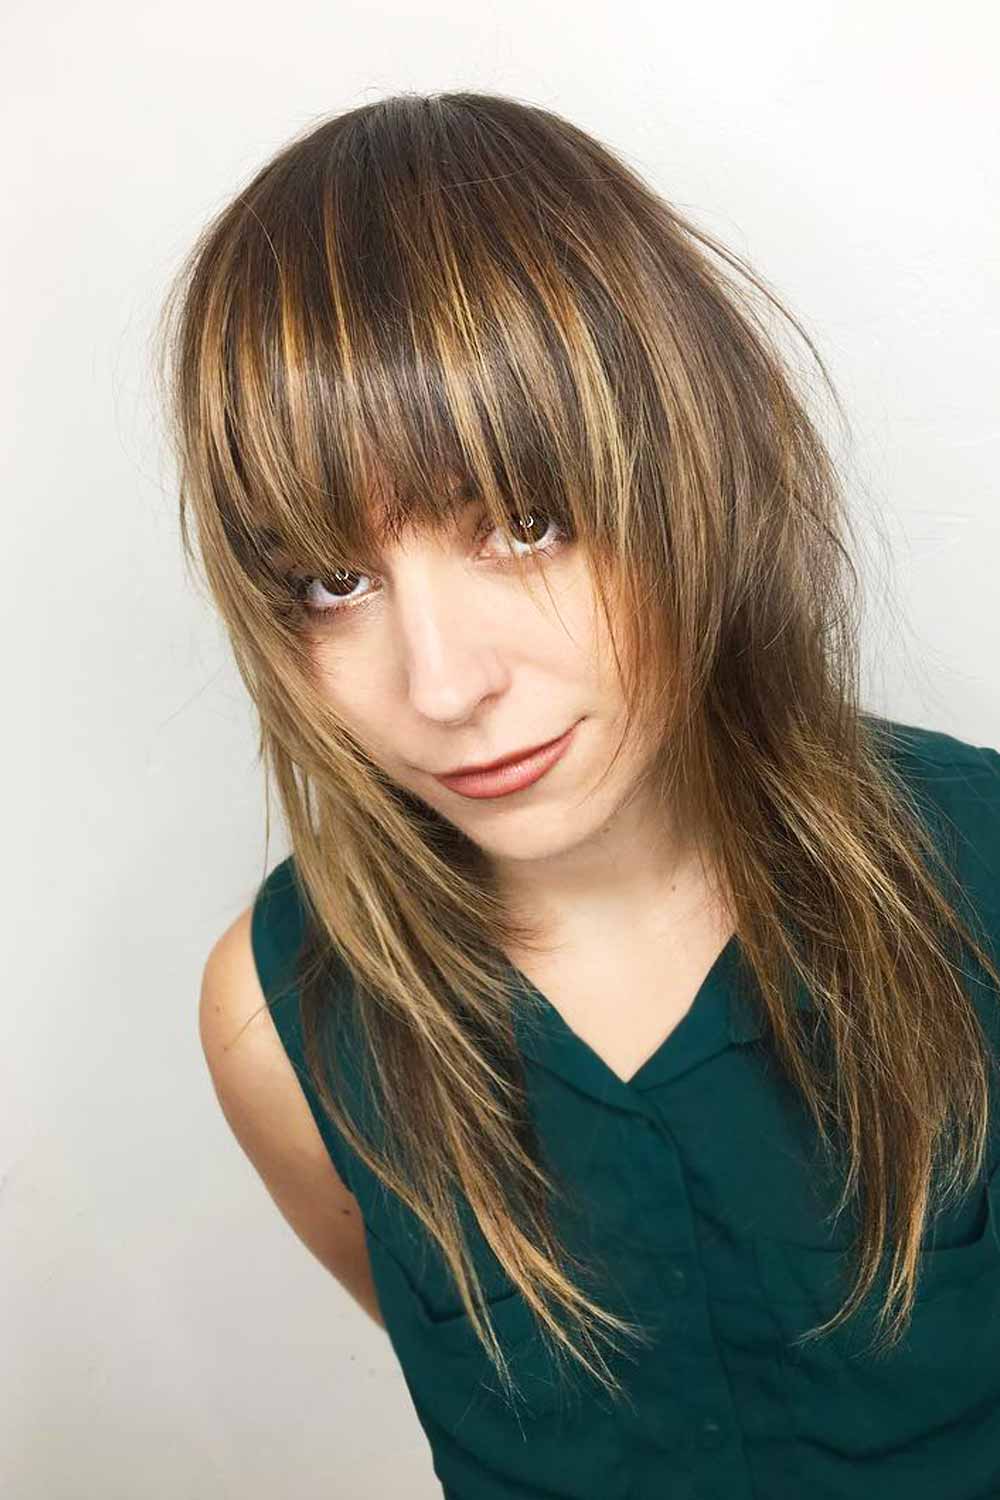 Shaggy Layered Haircuts For Your Distinctive Style #layeredhaircuts #layeredhair #haircuts